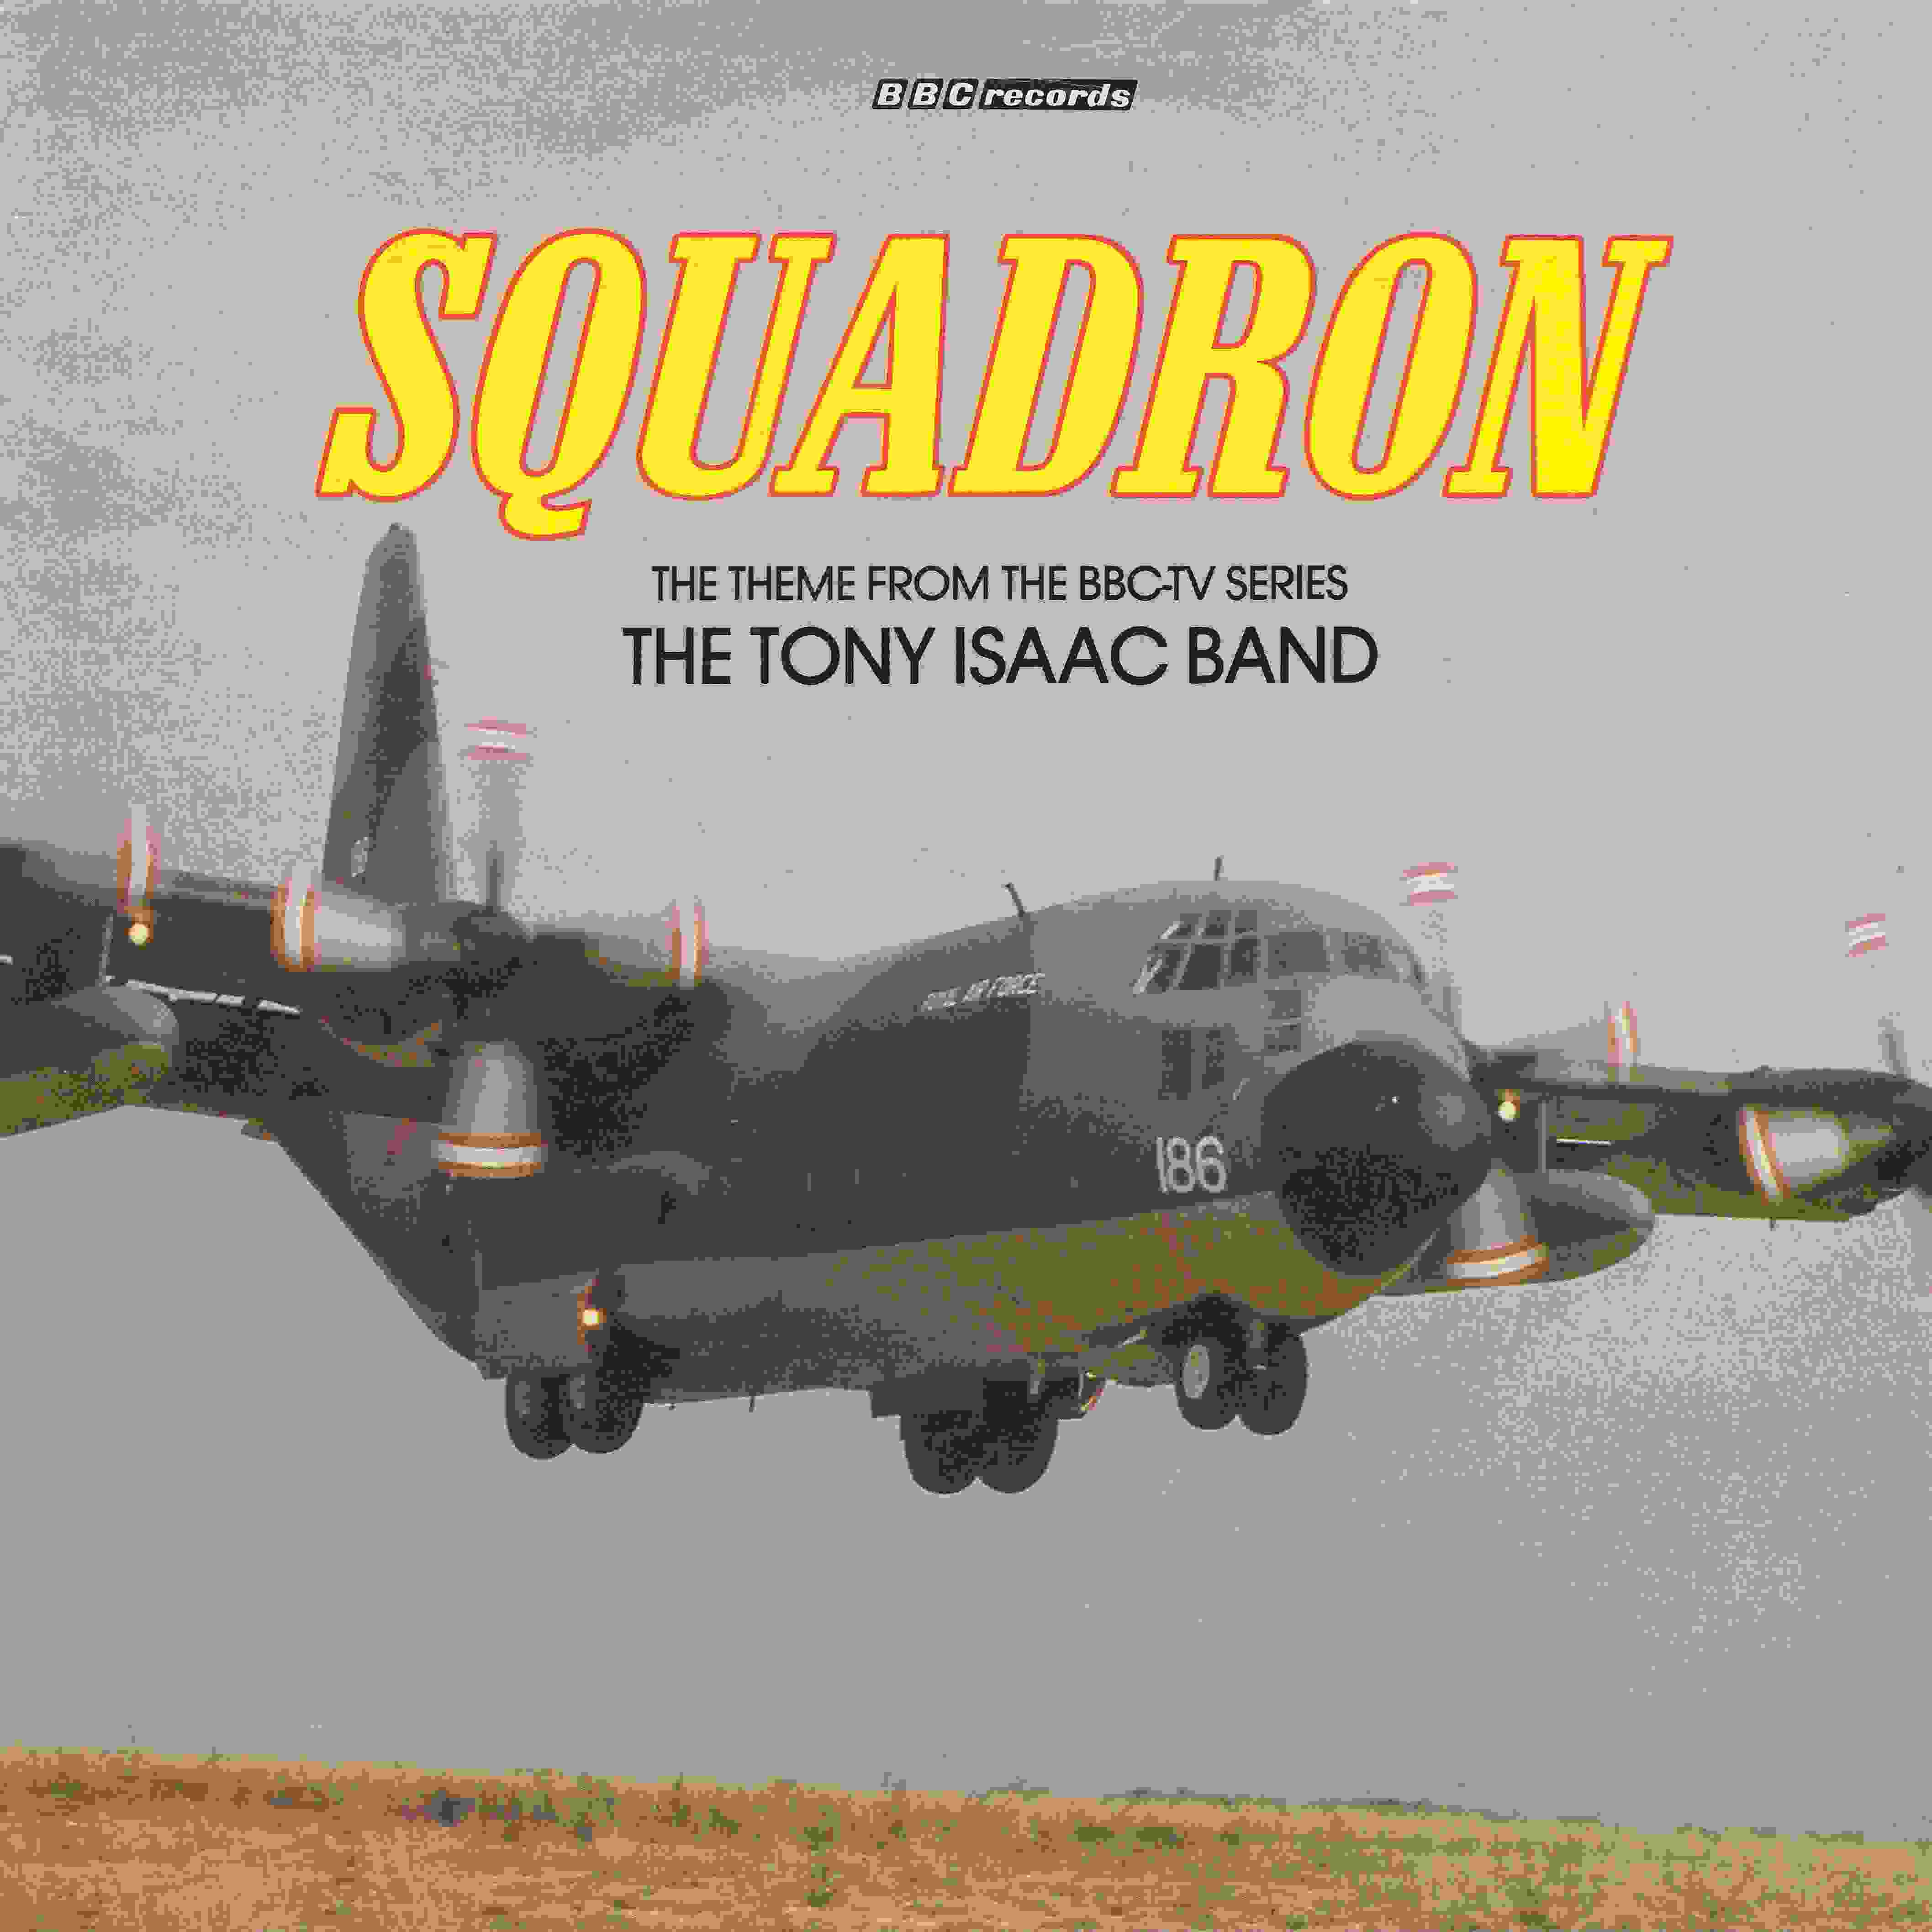 Picture of RESL 120 Squadron by artist Tony Isaac from the BBC records and Tapes library